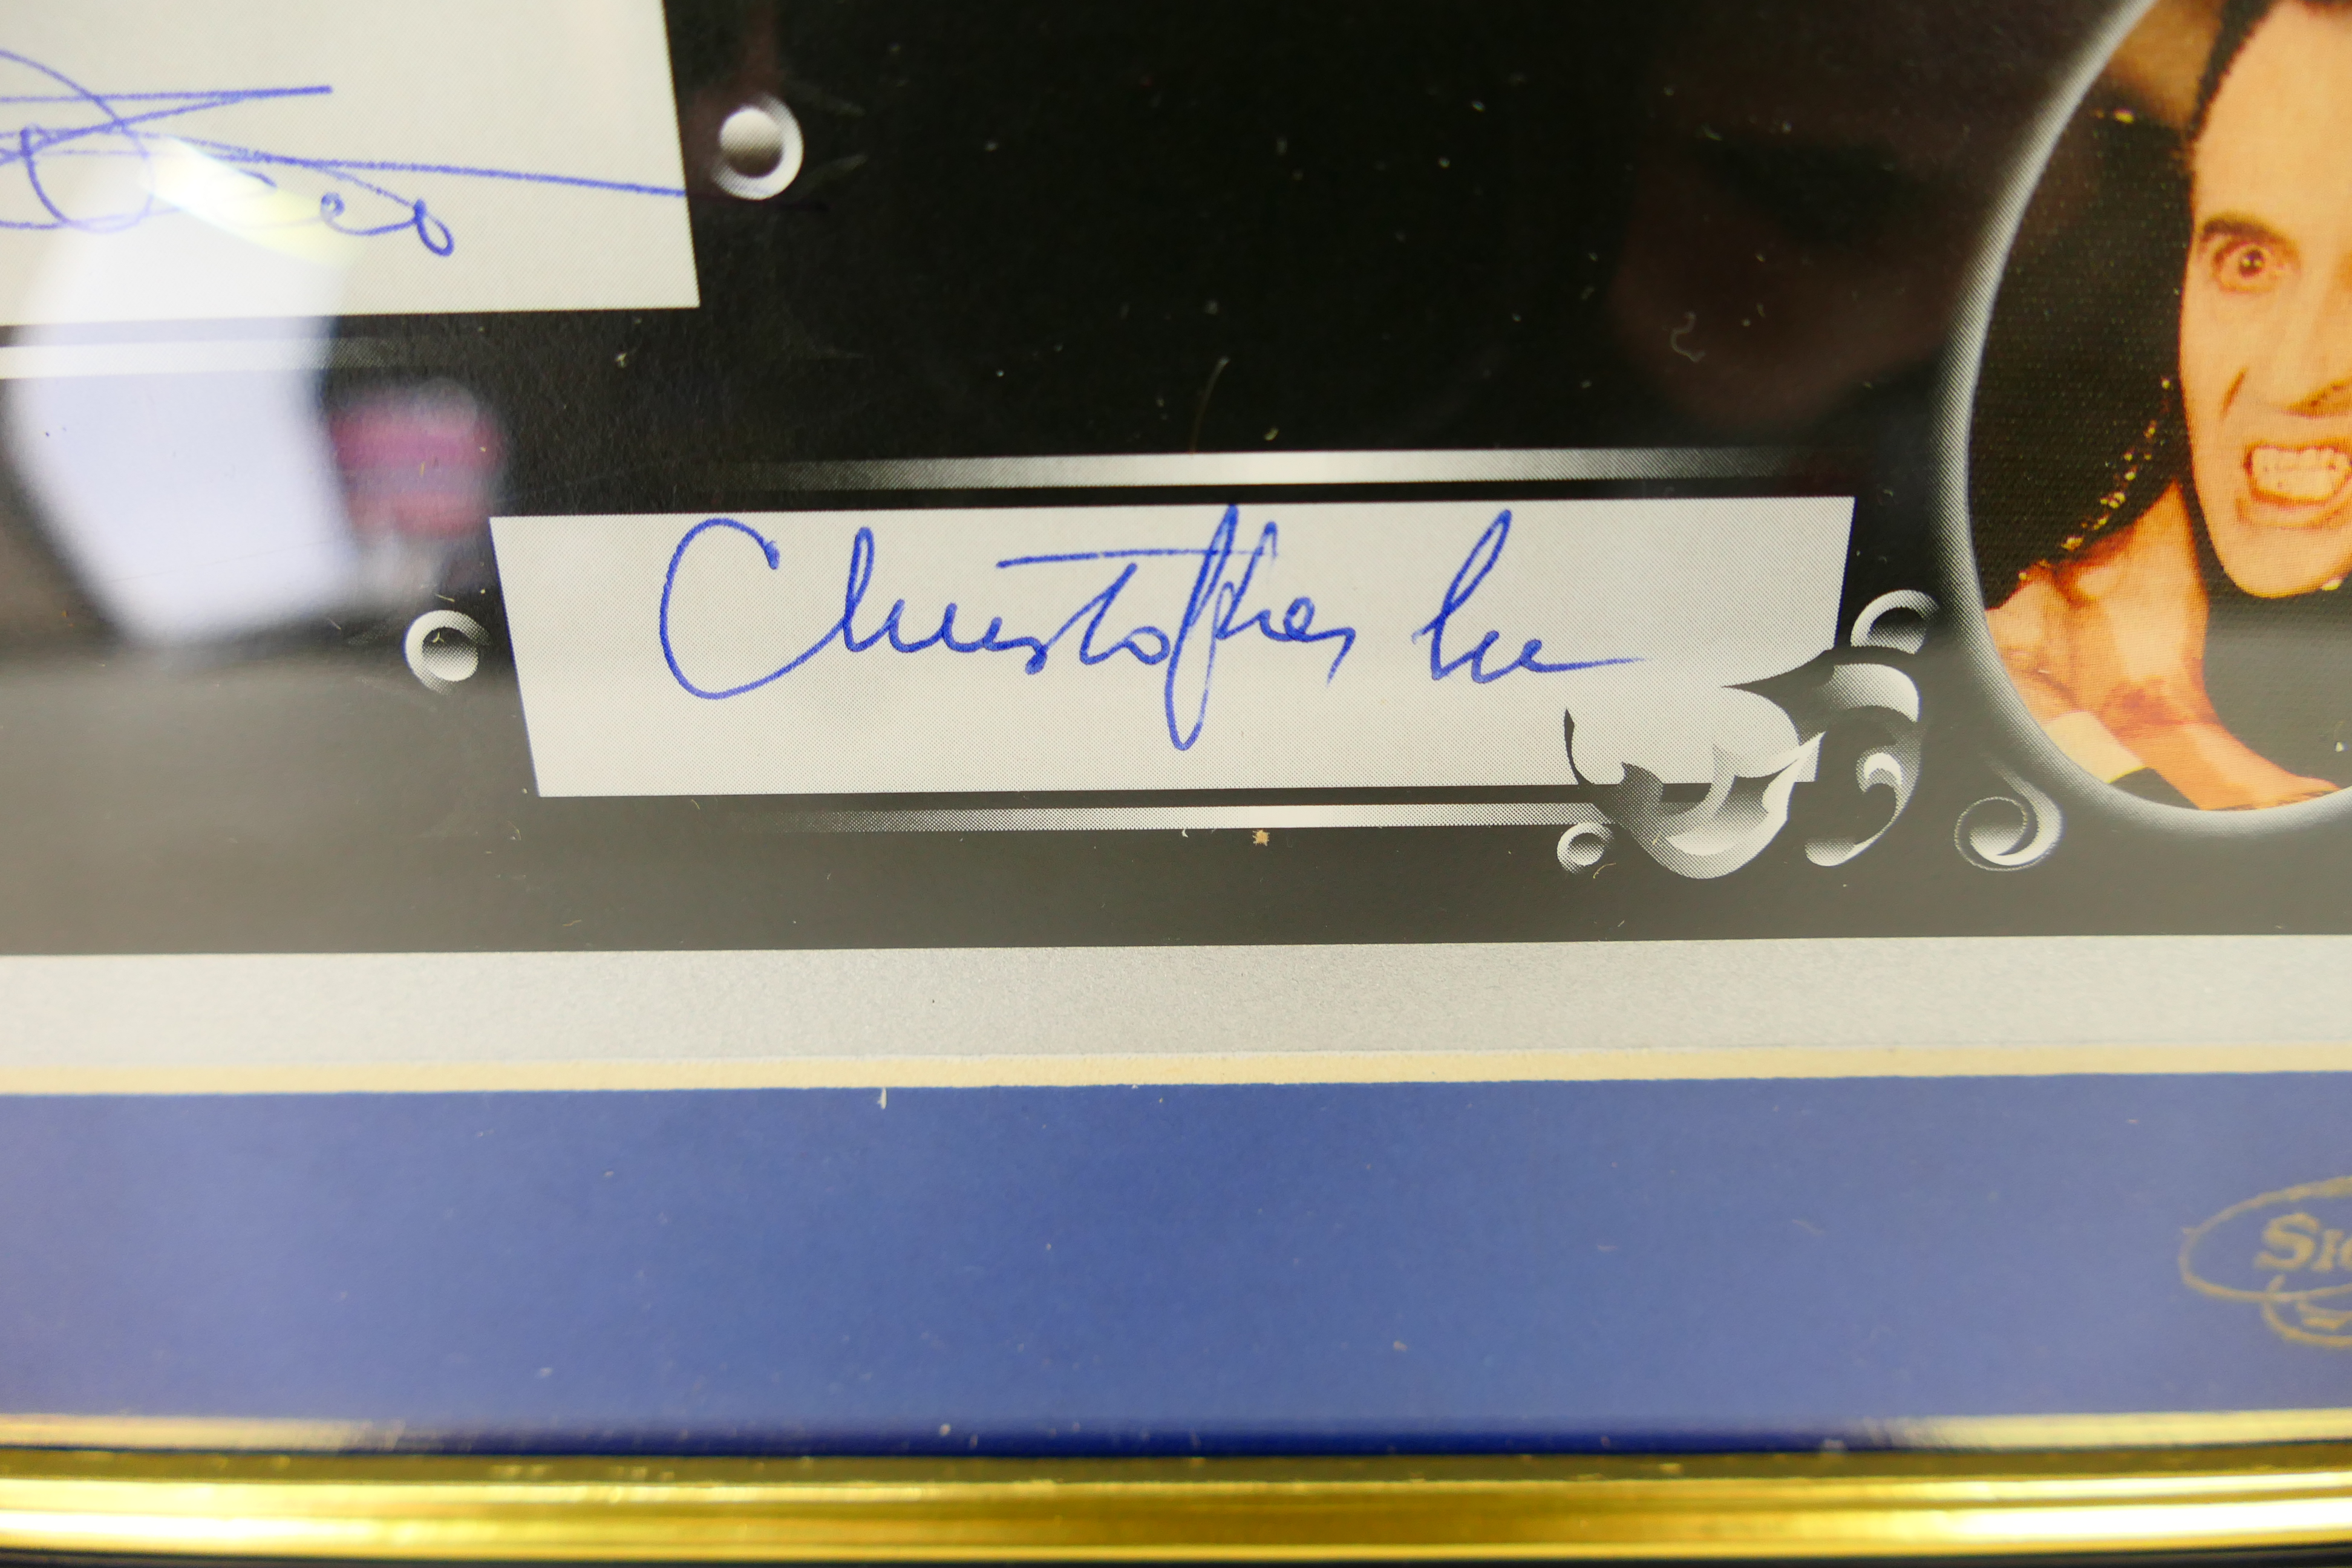 A limited edition, signed Classic Movie - Image 3 of 5